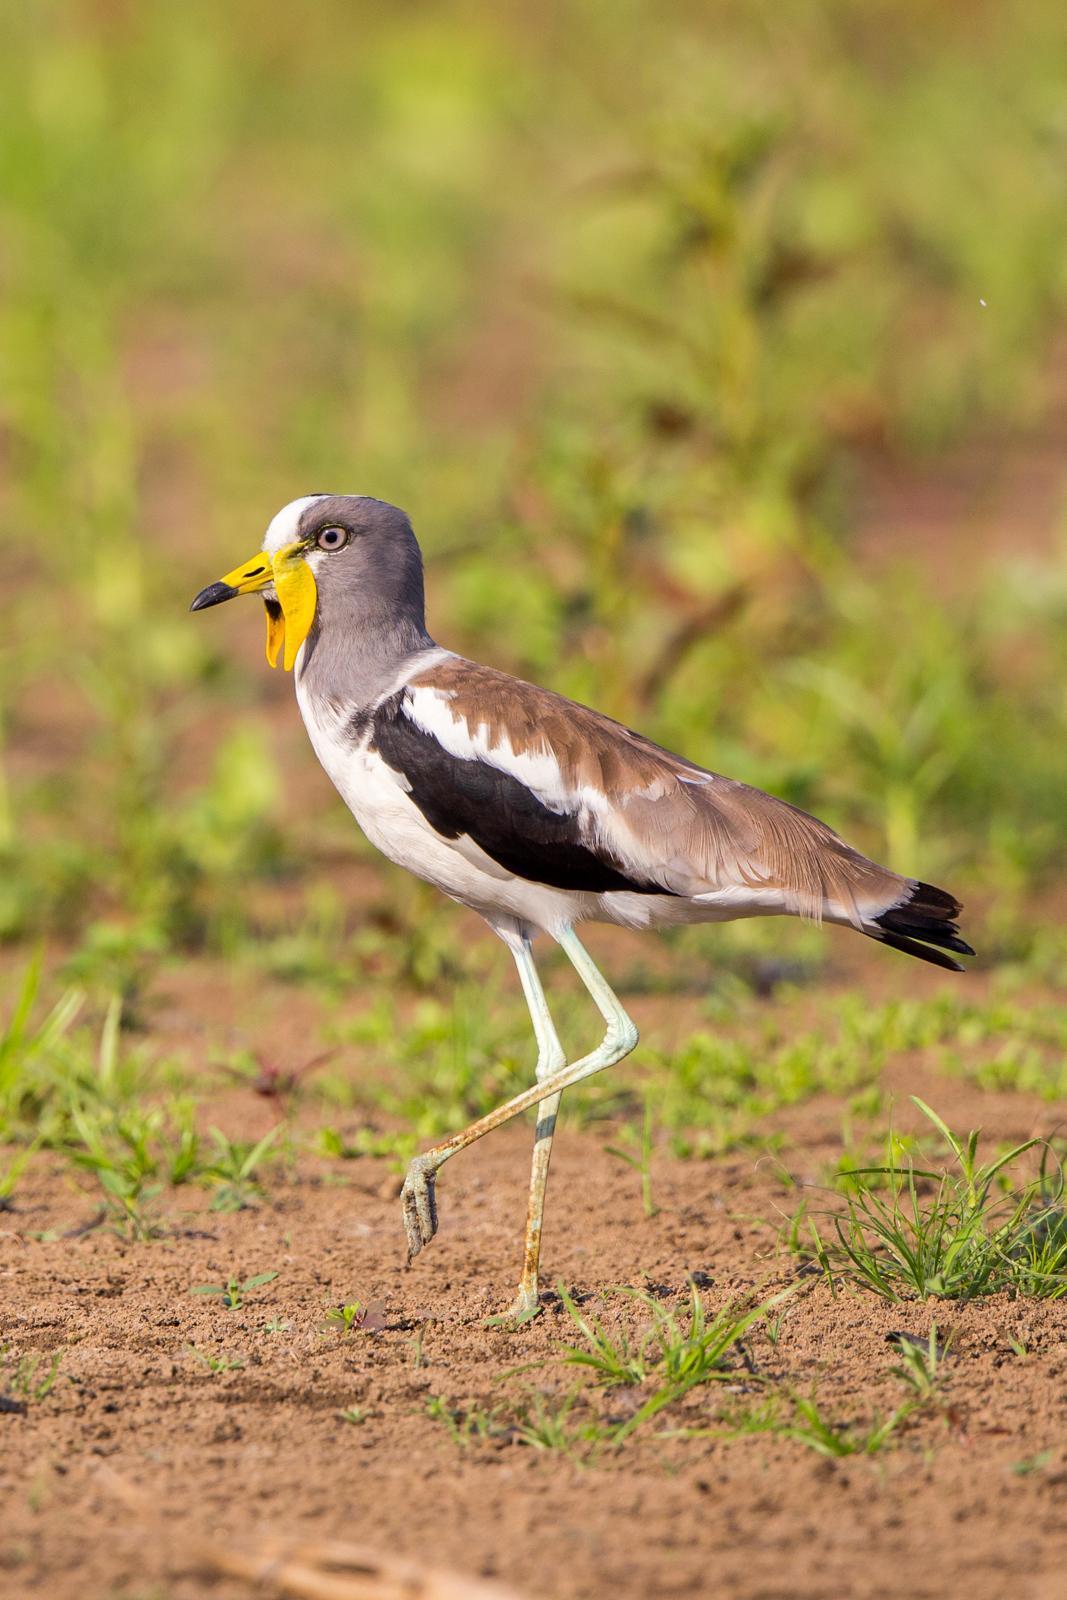 White-headed Lapwing Photo by Rhys Marsh